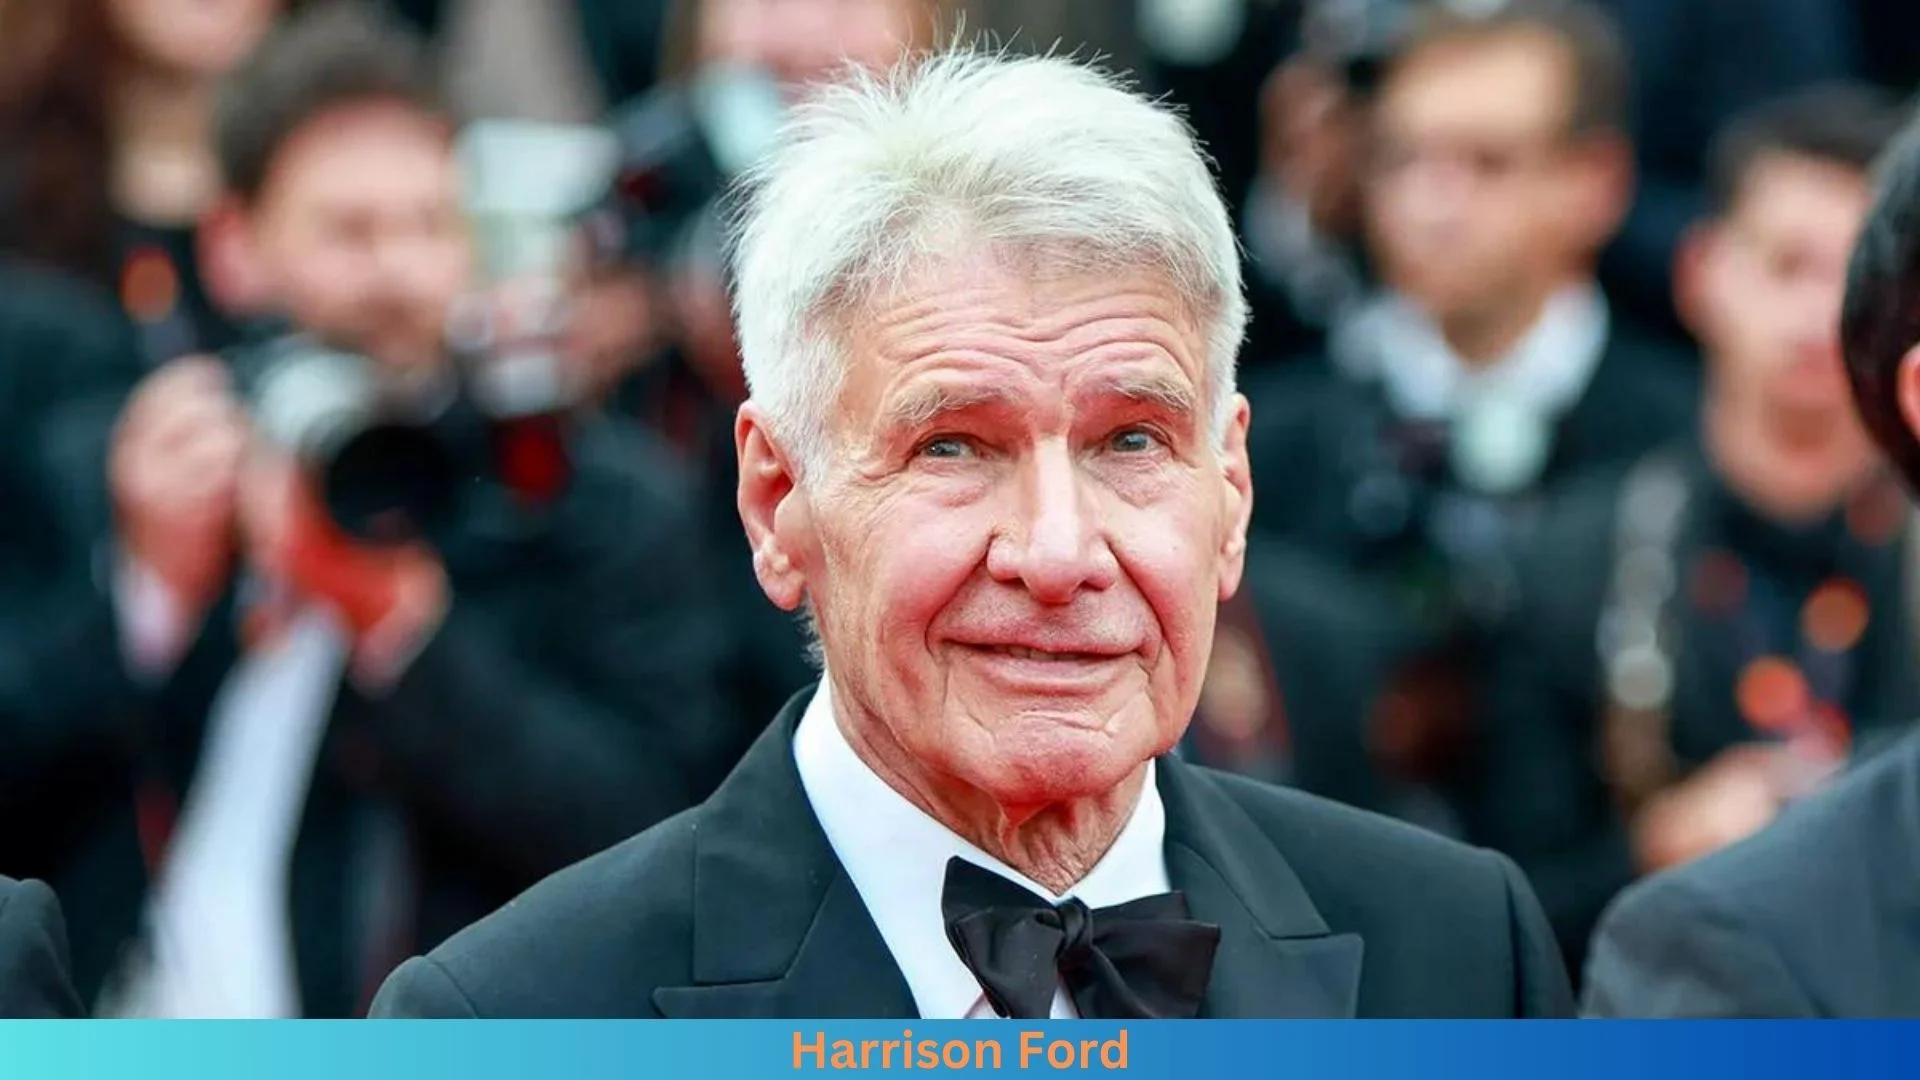 Net Worth of Harrison Ford